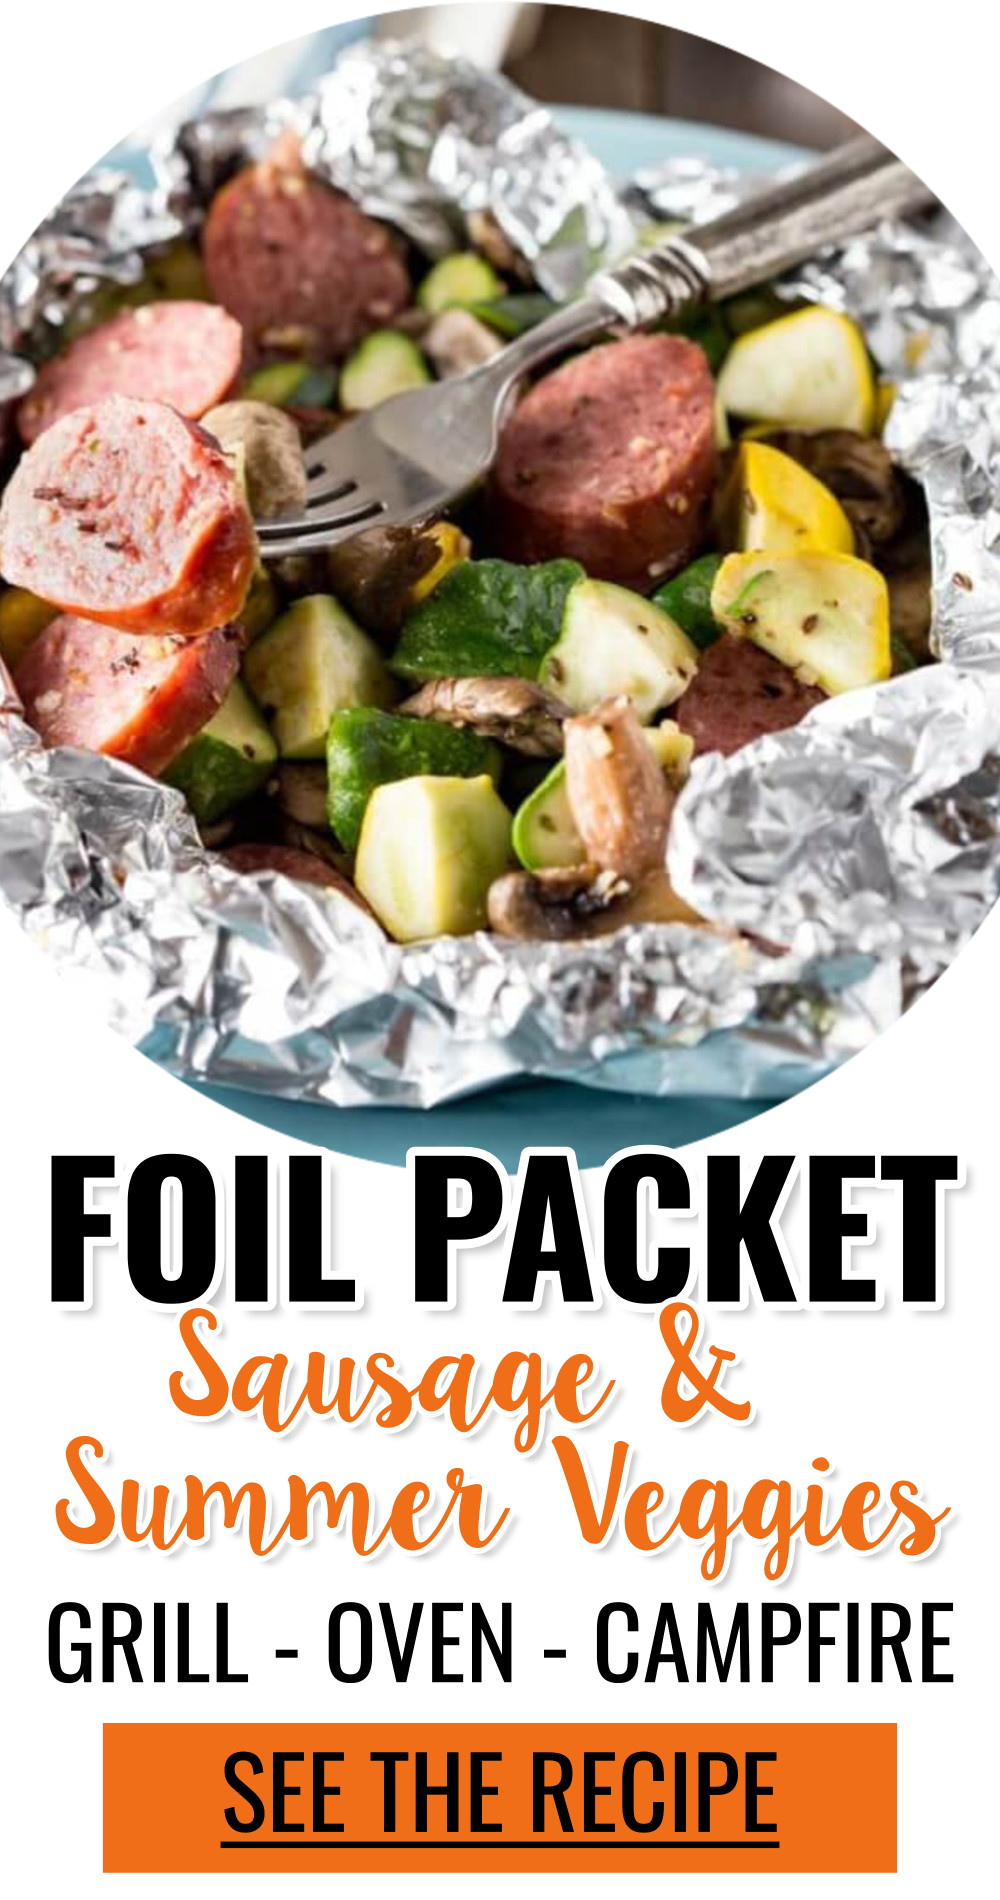 Sausage and Summer Veggies Foil Packet Recipe For Oven, Grill Or Campfire